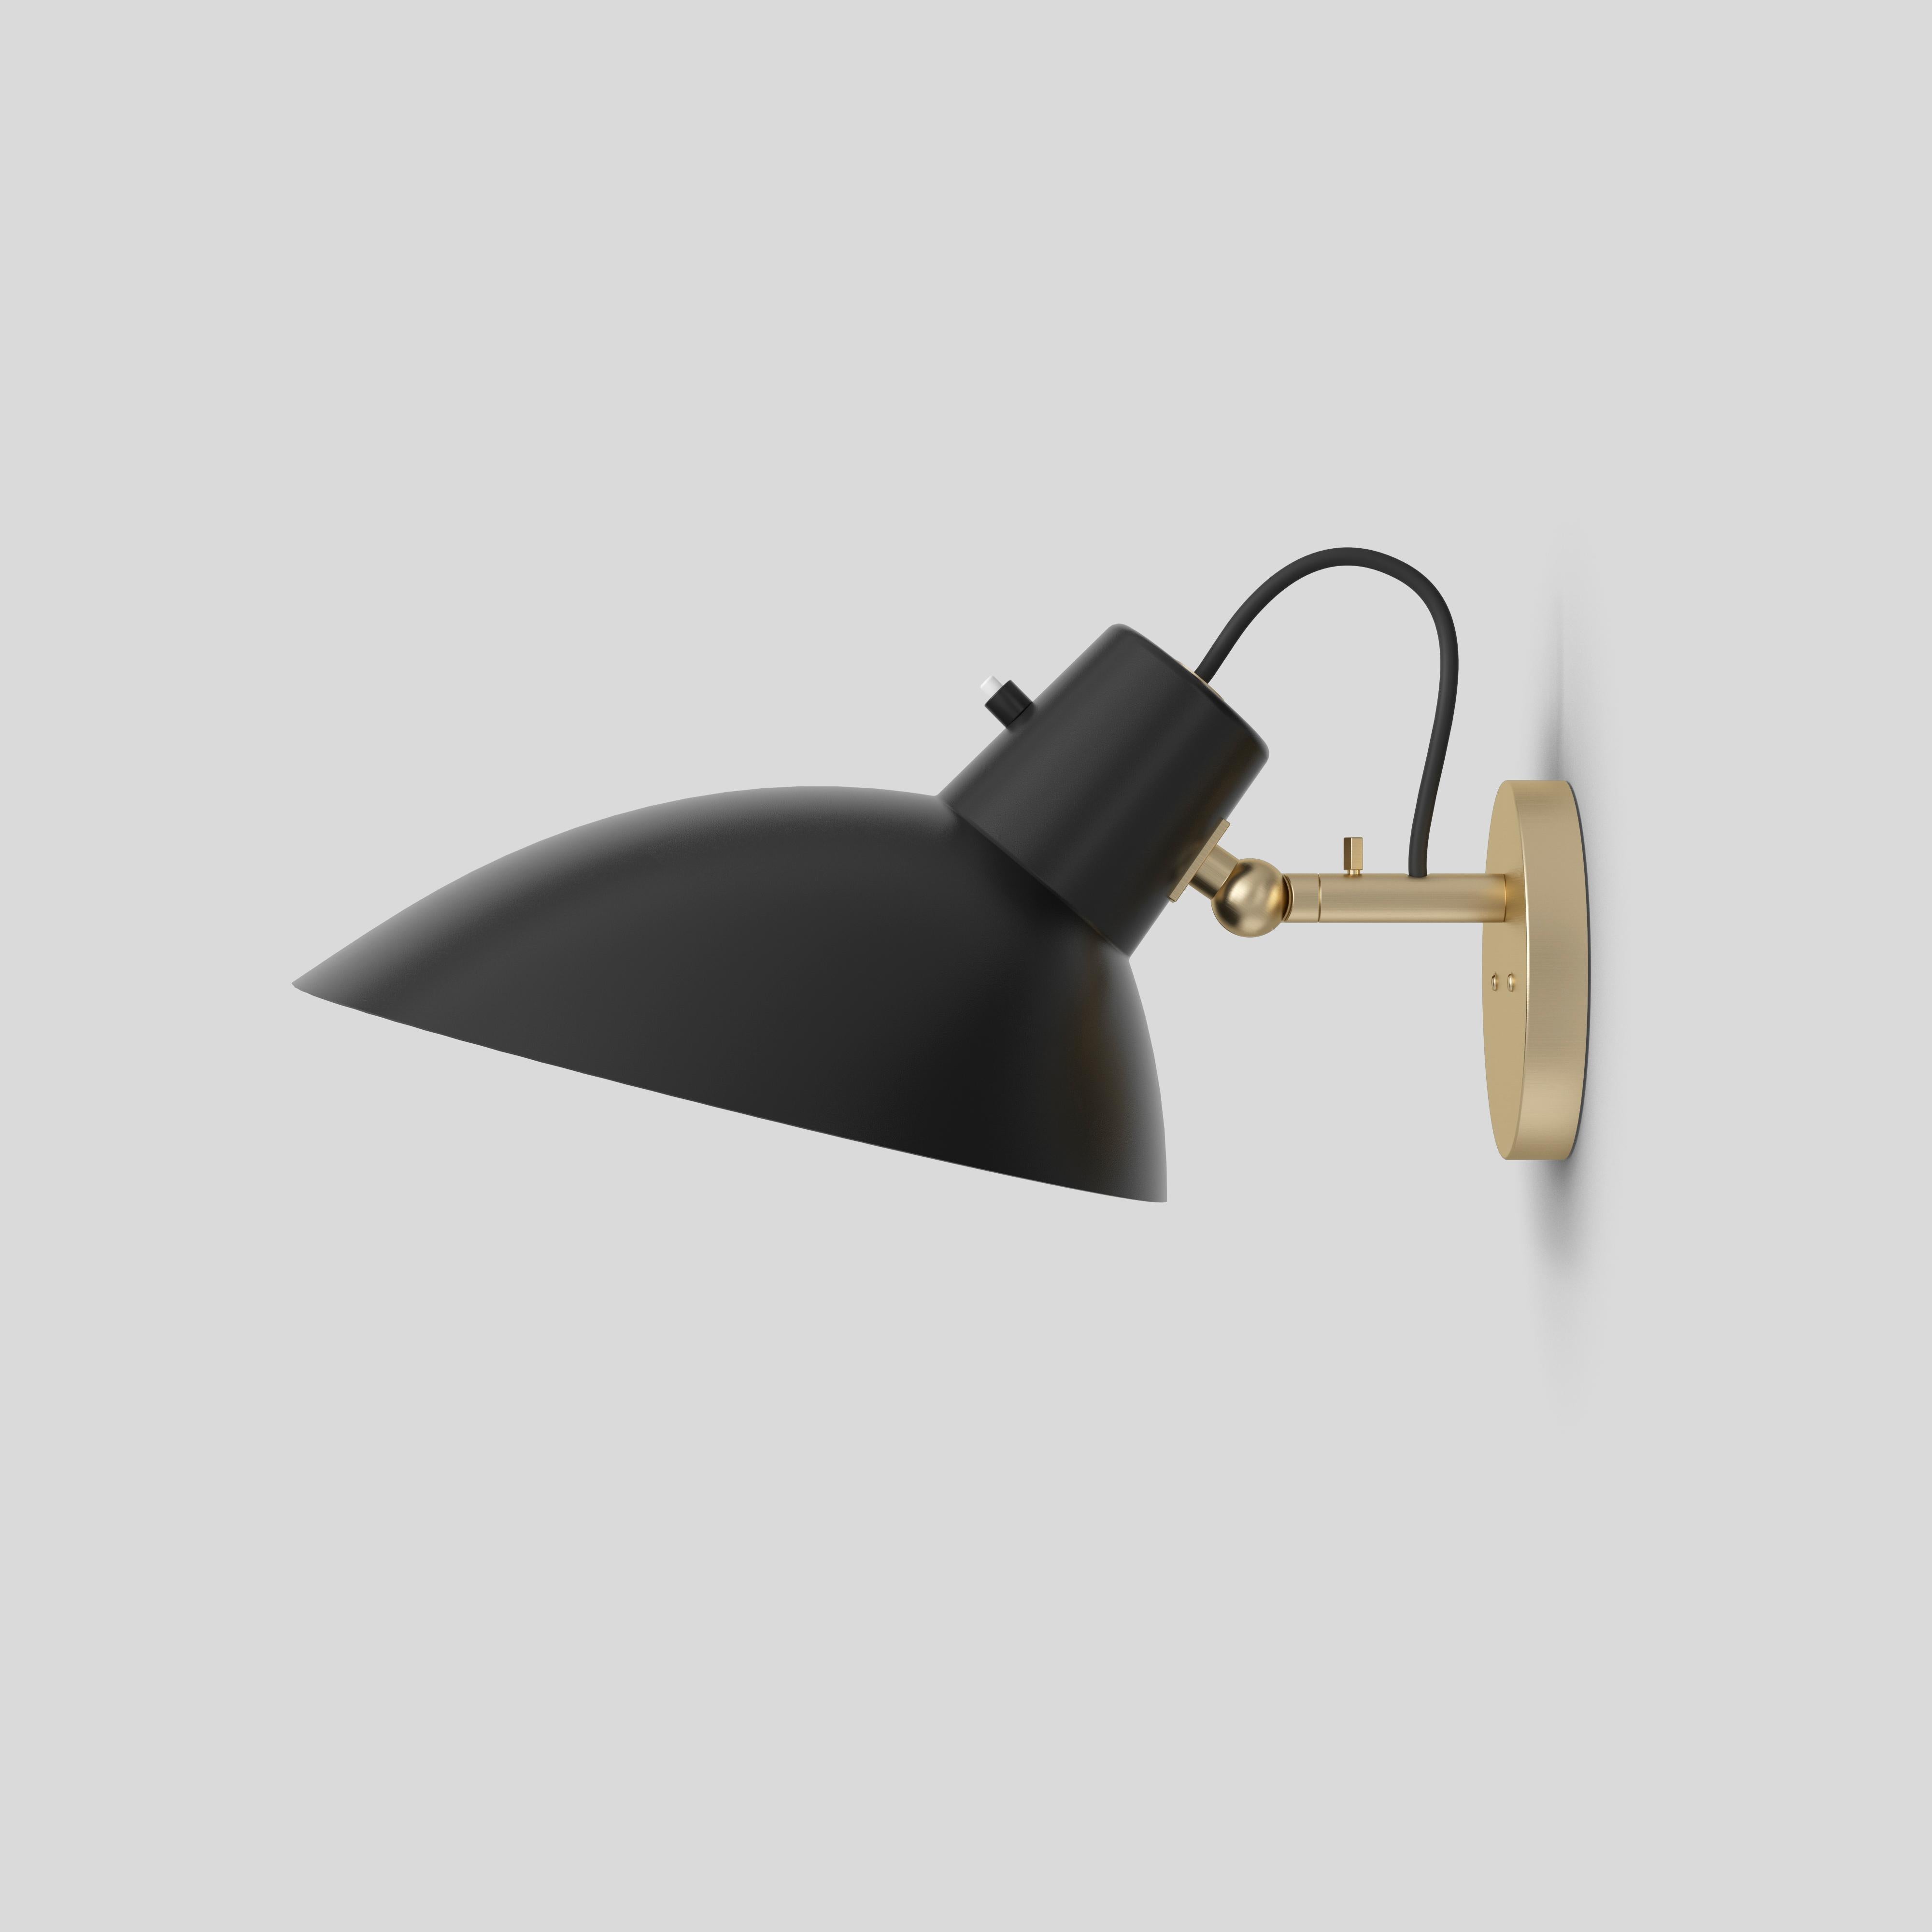 VV Cinquanta Wall
Design by Vittoriano Viganò
This version is with black lacquered reflector and brass mount, including switch

The VV Cinquanta features an elegant and versatile posable direct light source that can swivel and tilt. The Wall